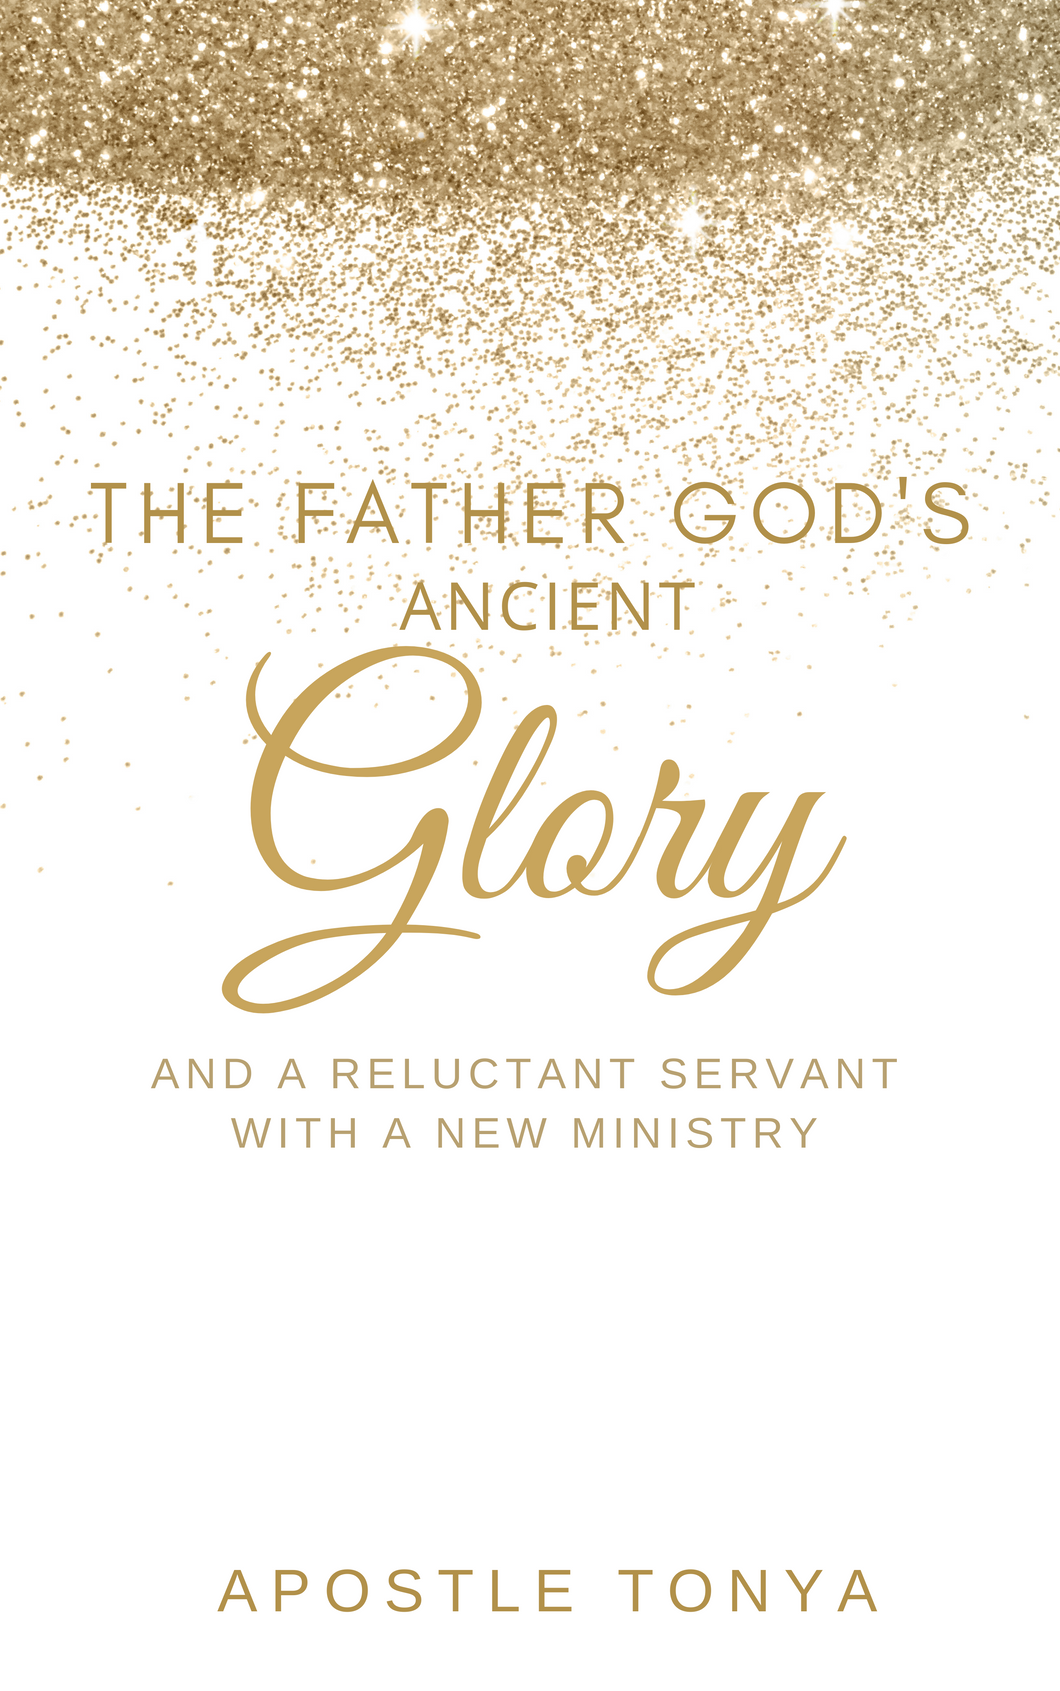 The Father's God's Ancient Glory:  And a Reluctant Servant with a new ministry